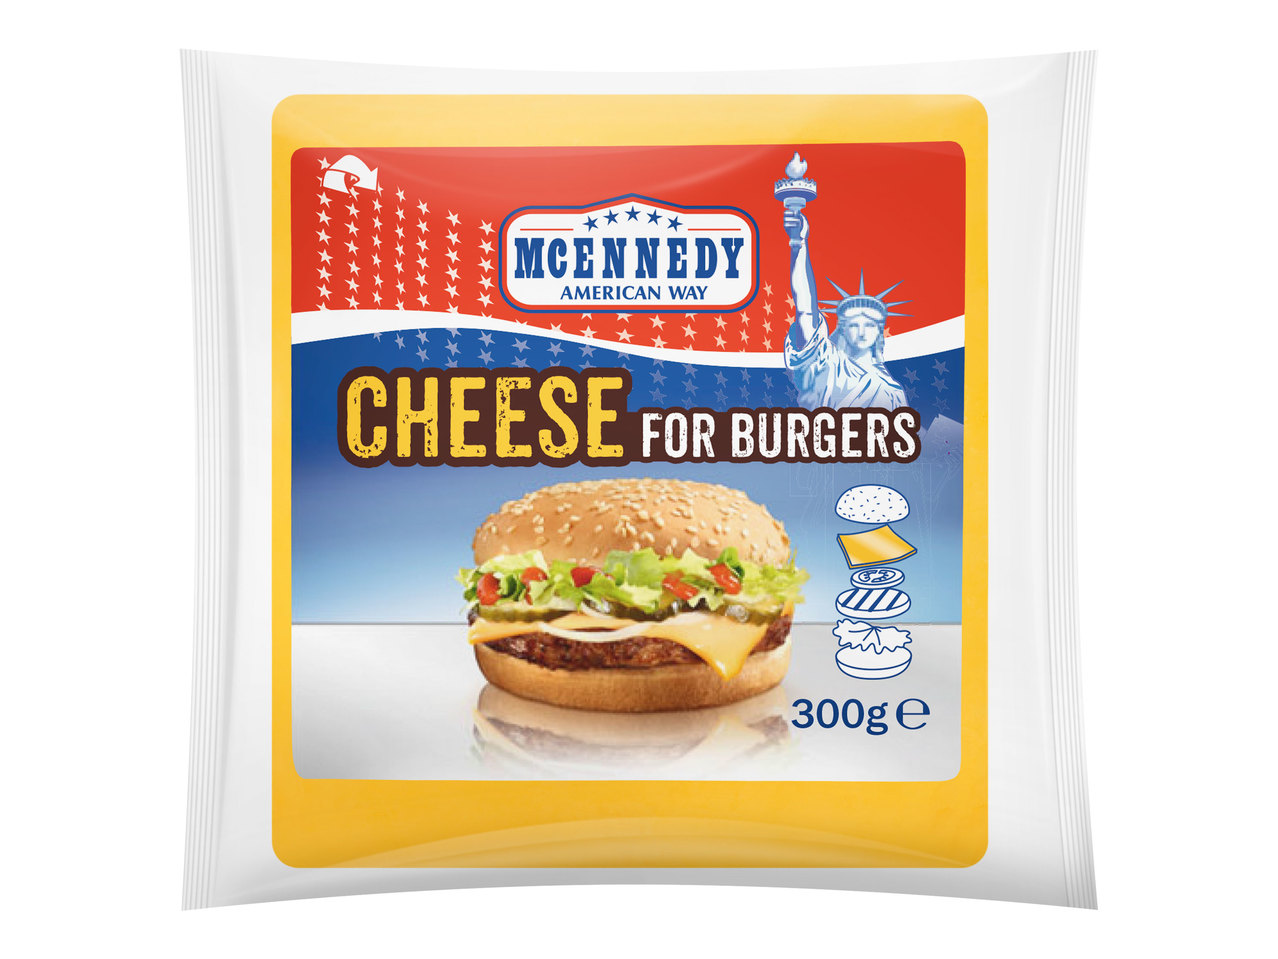 MCENNEDY Cheese for Burgers